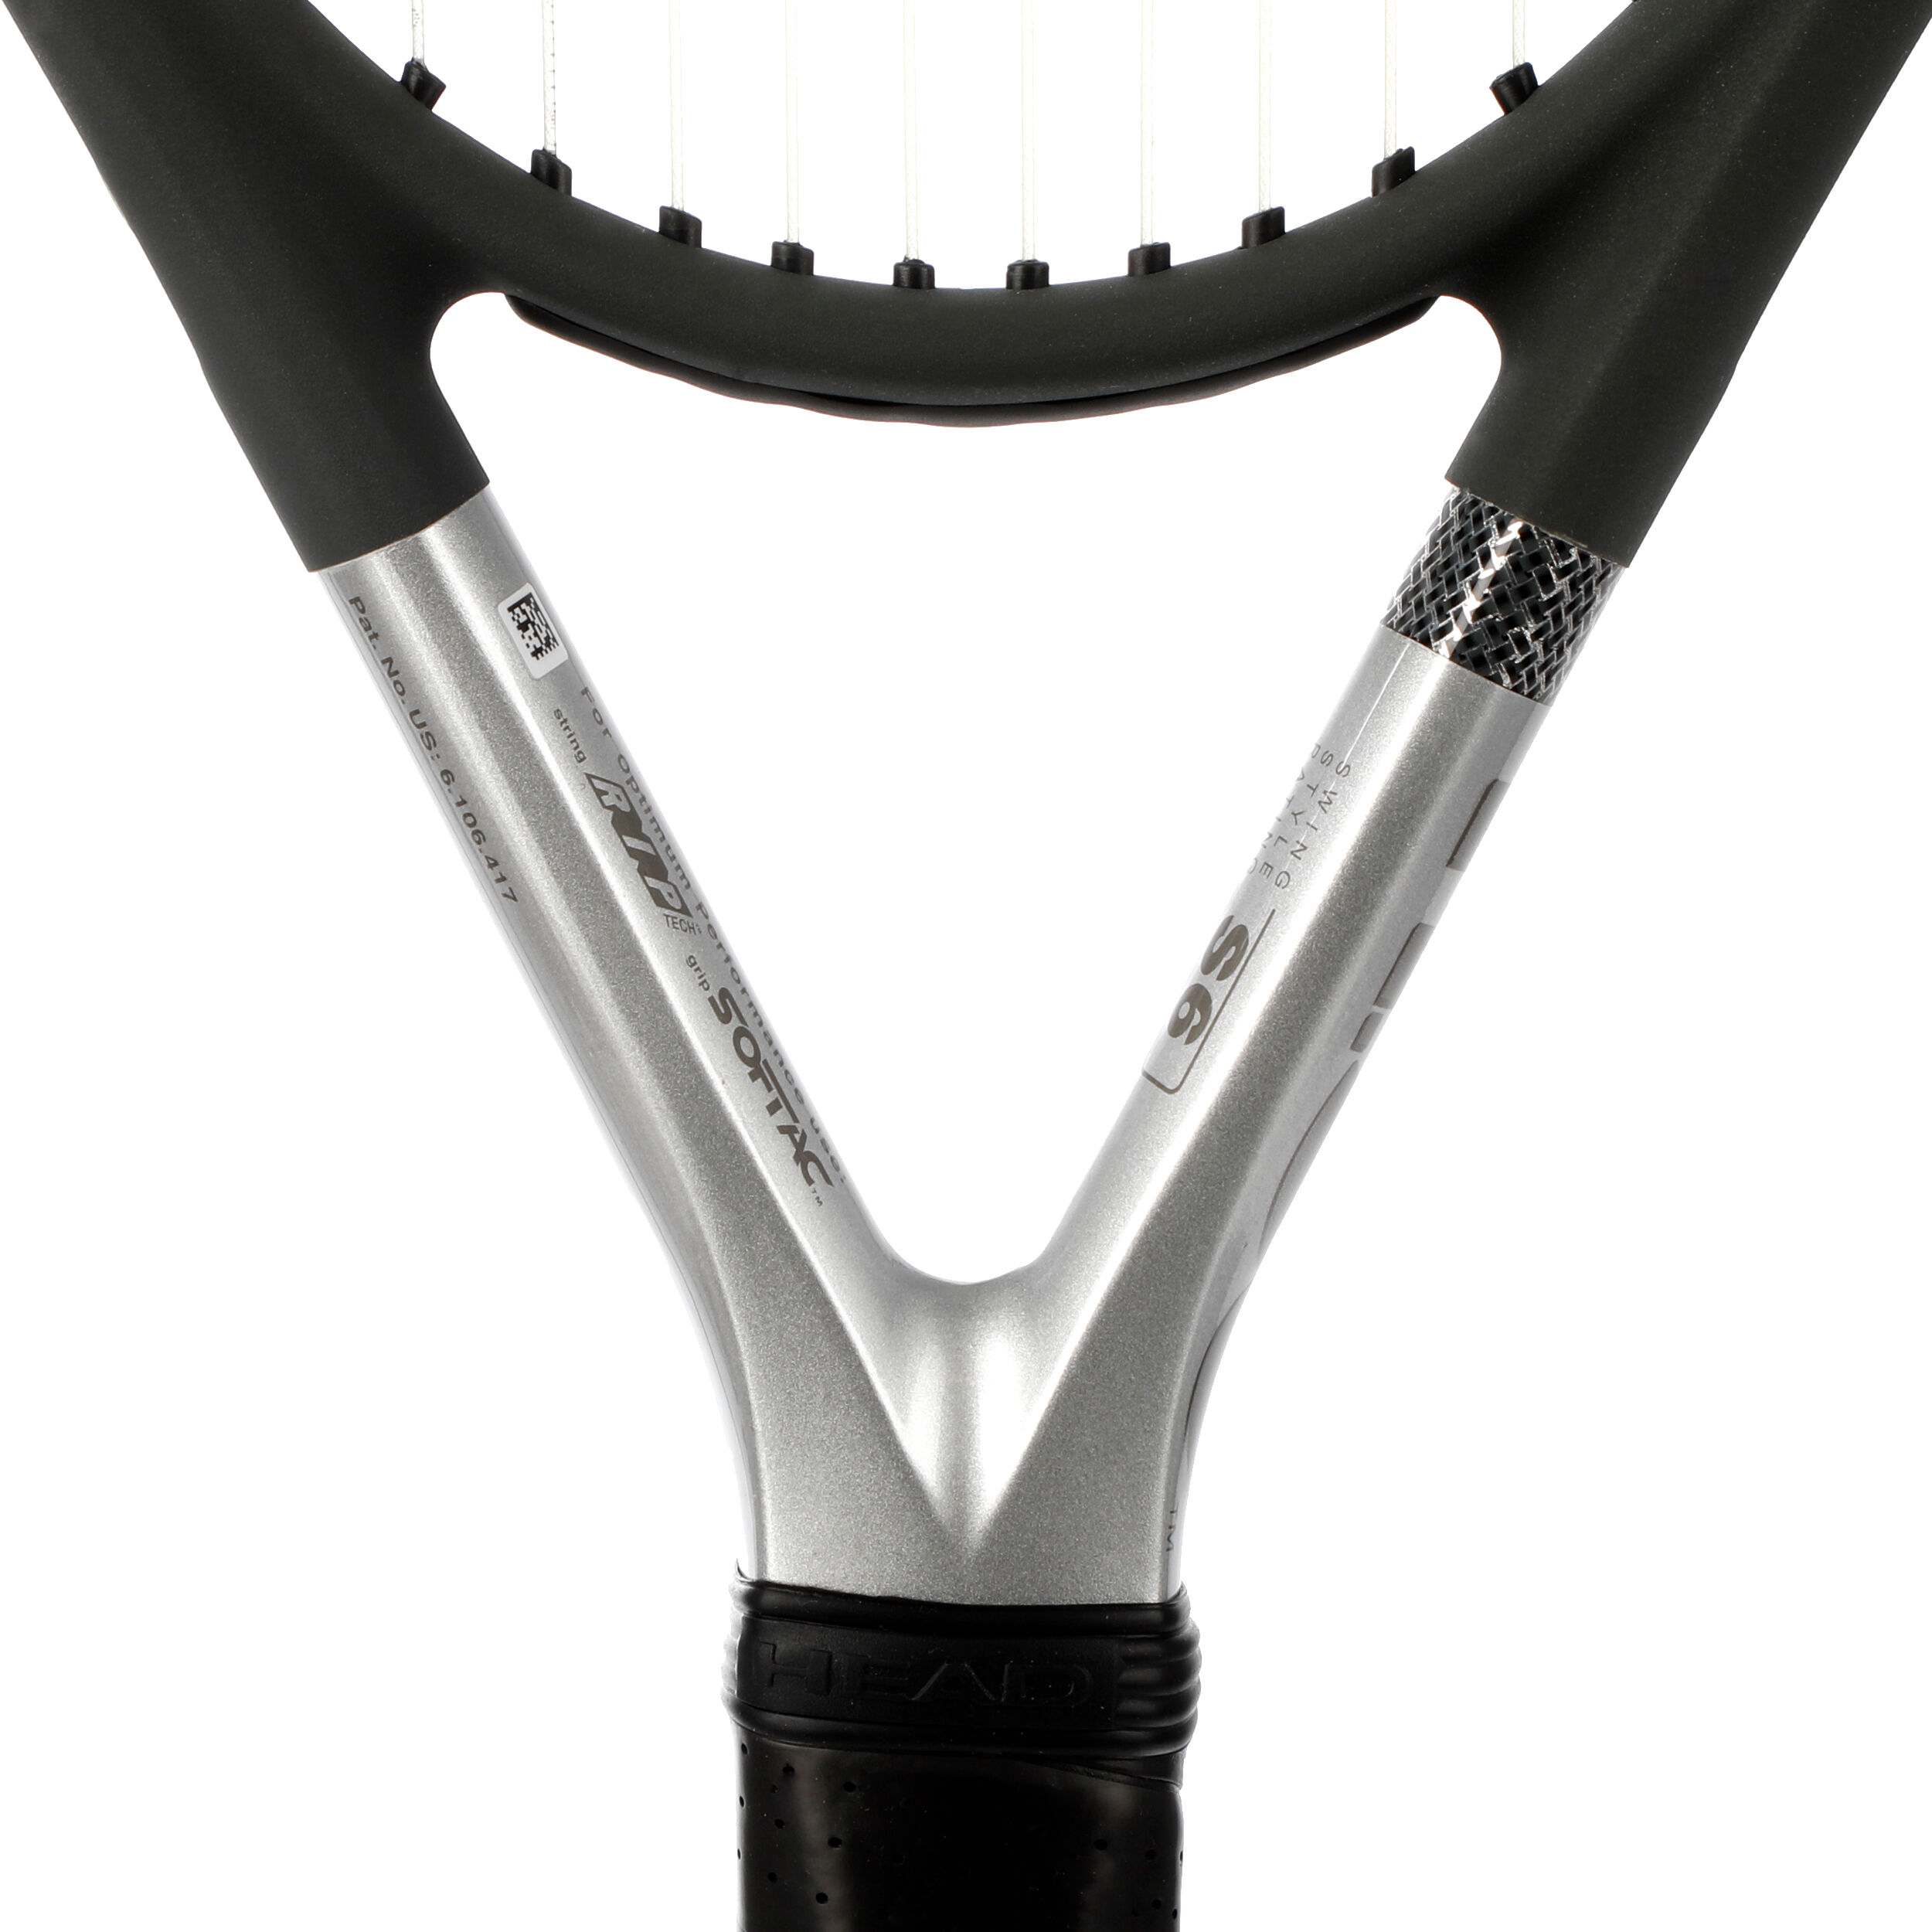 2XHead Ti S6  Tennis Racket rrp £320 dpd 1 day uk delivery.grip 3. 